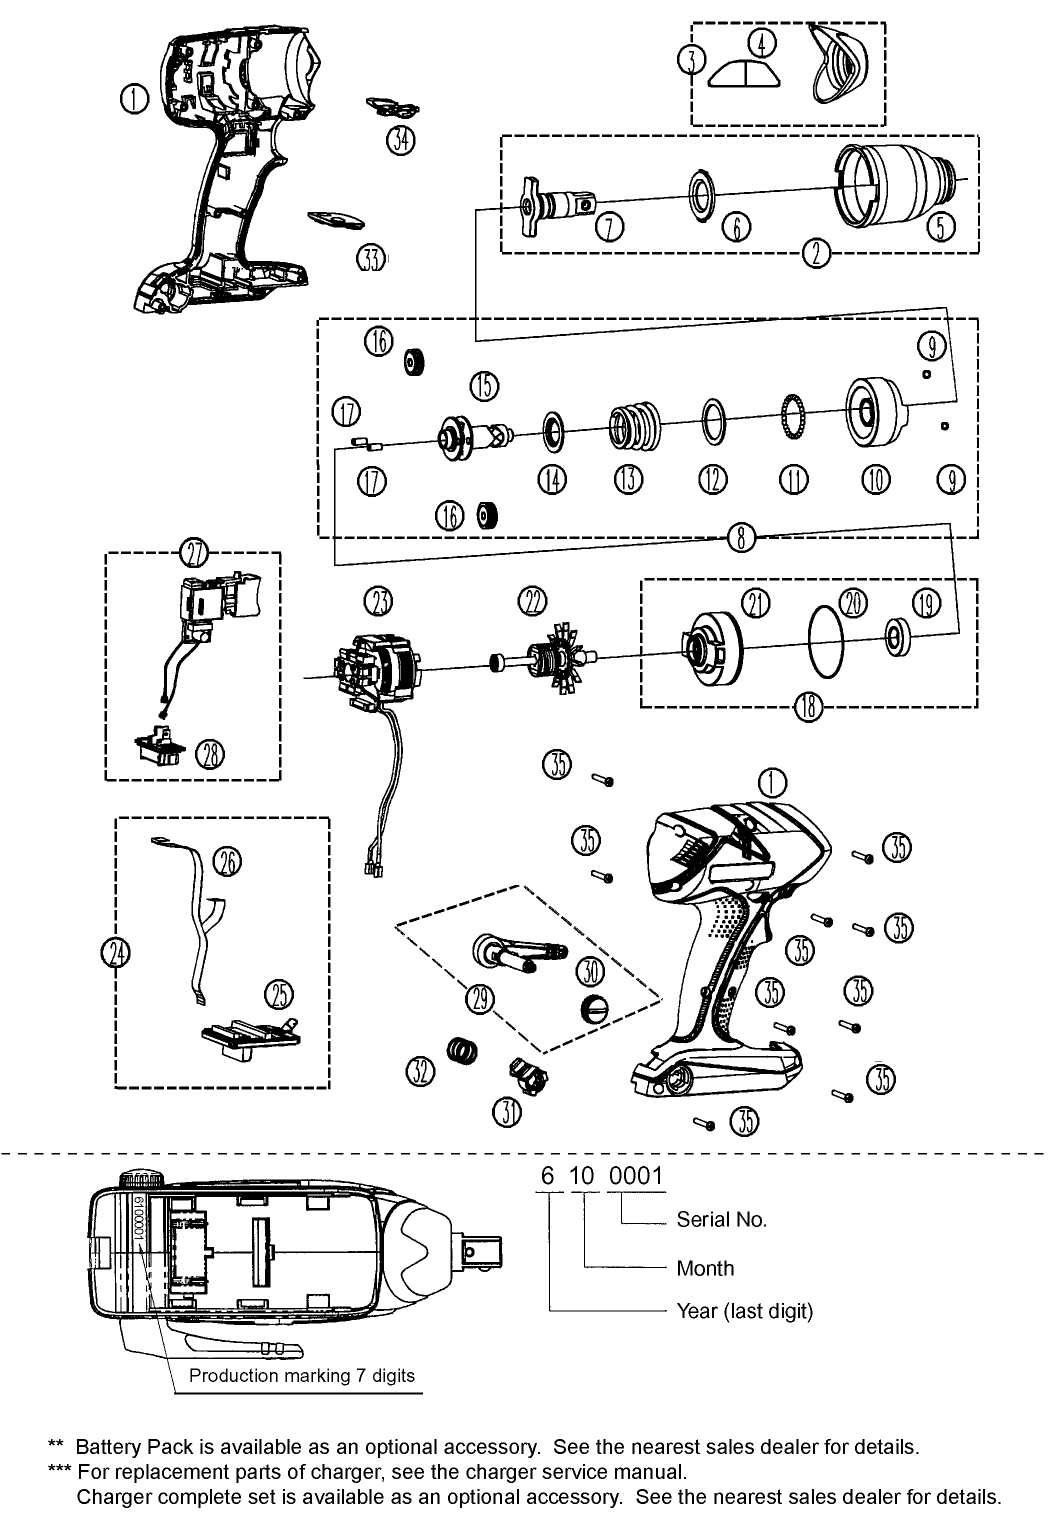 EY7541: Exploded View